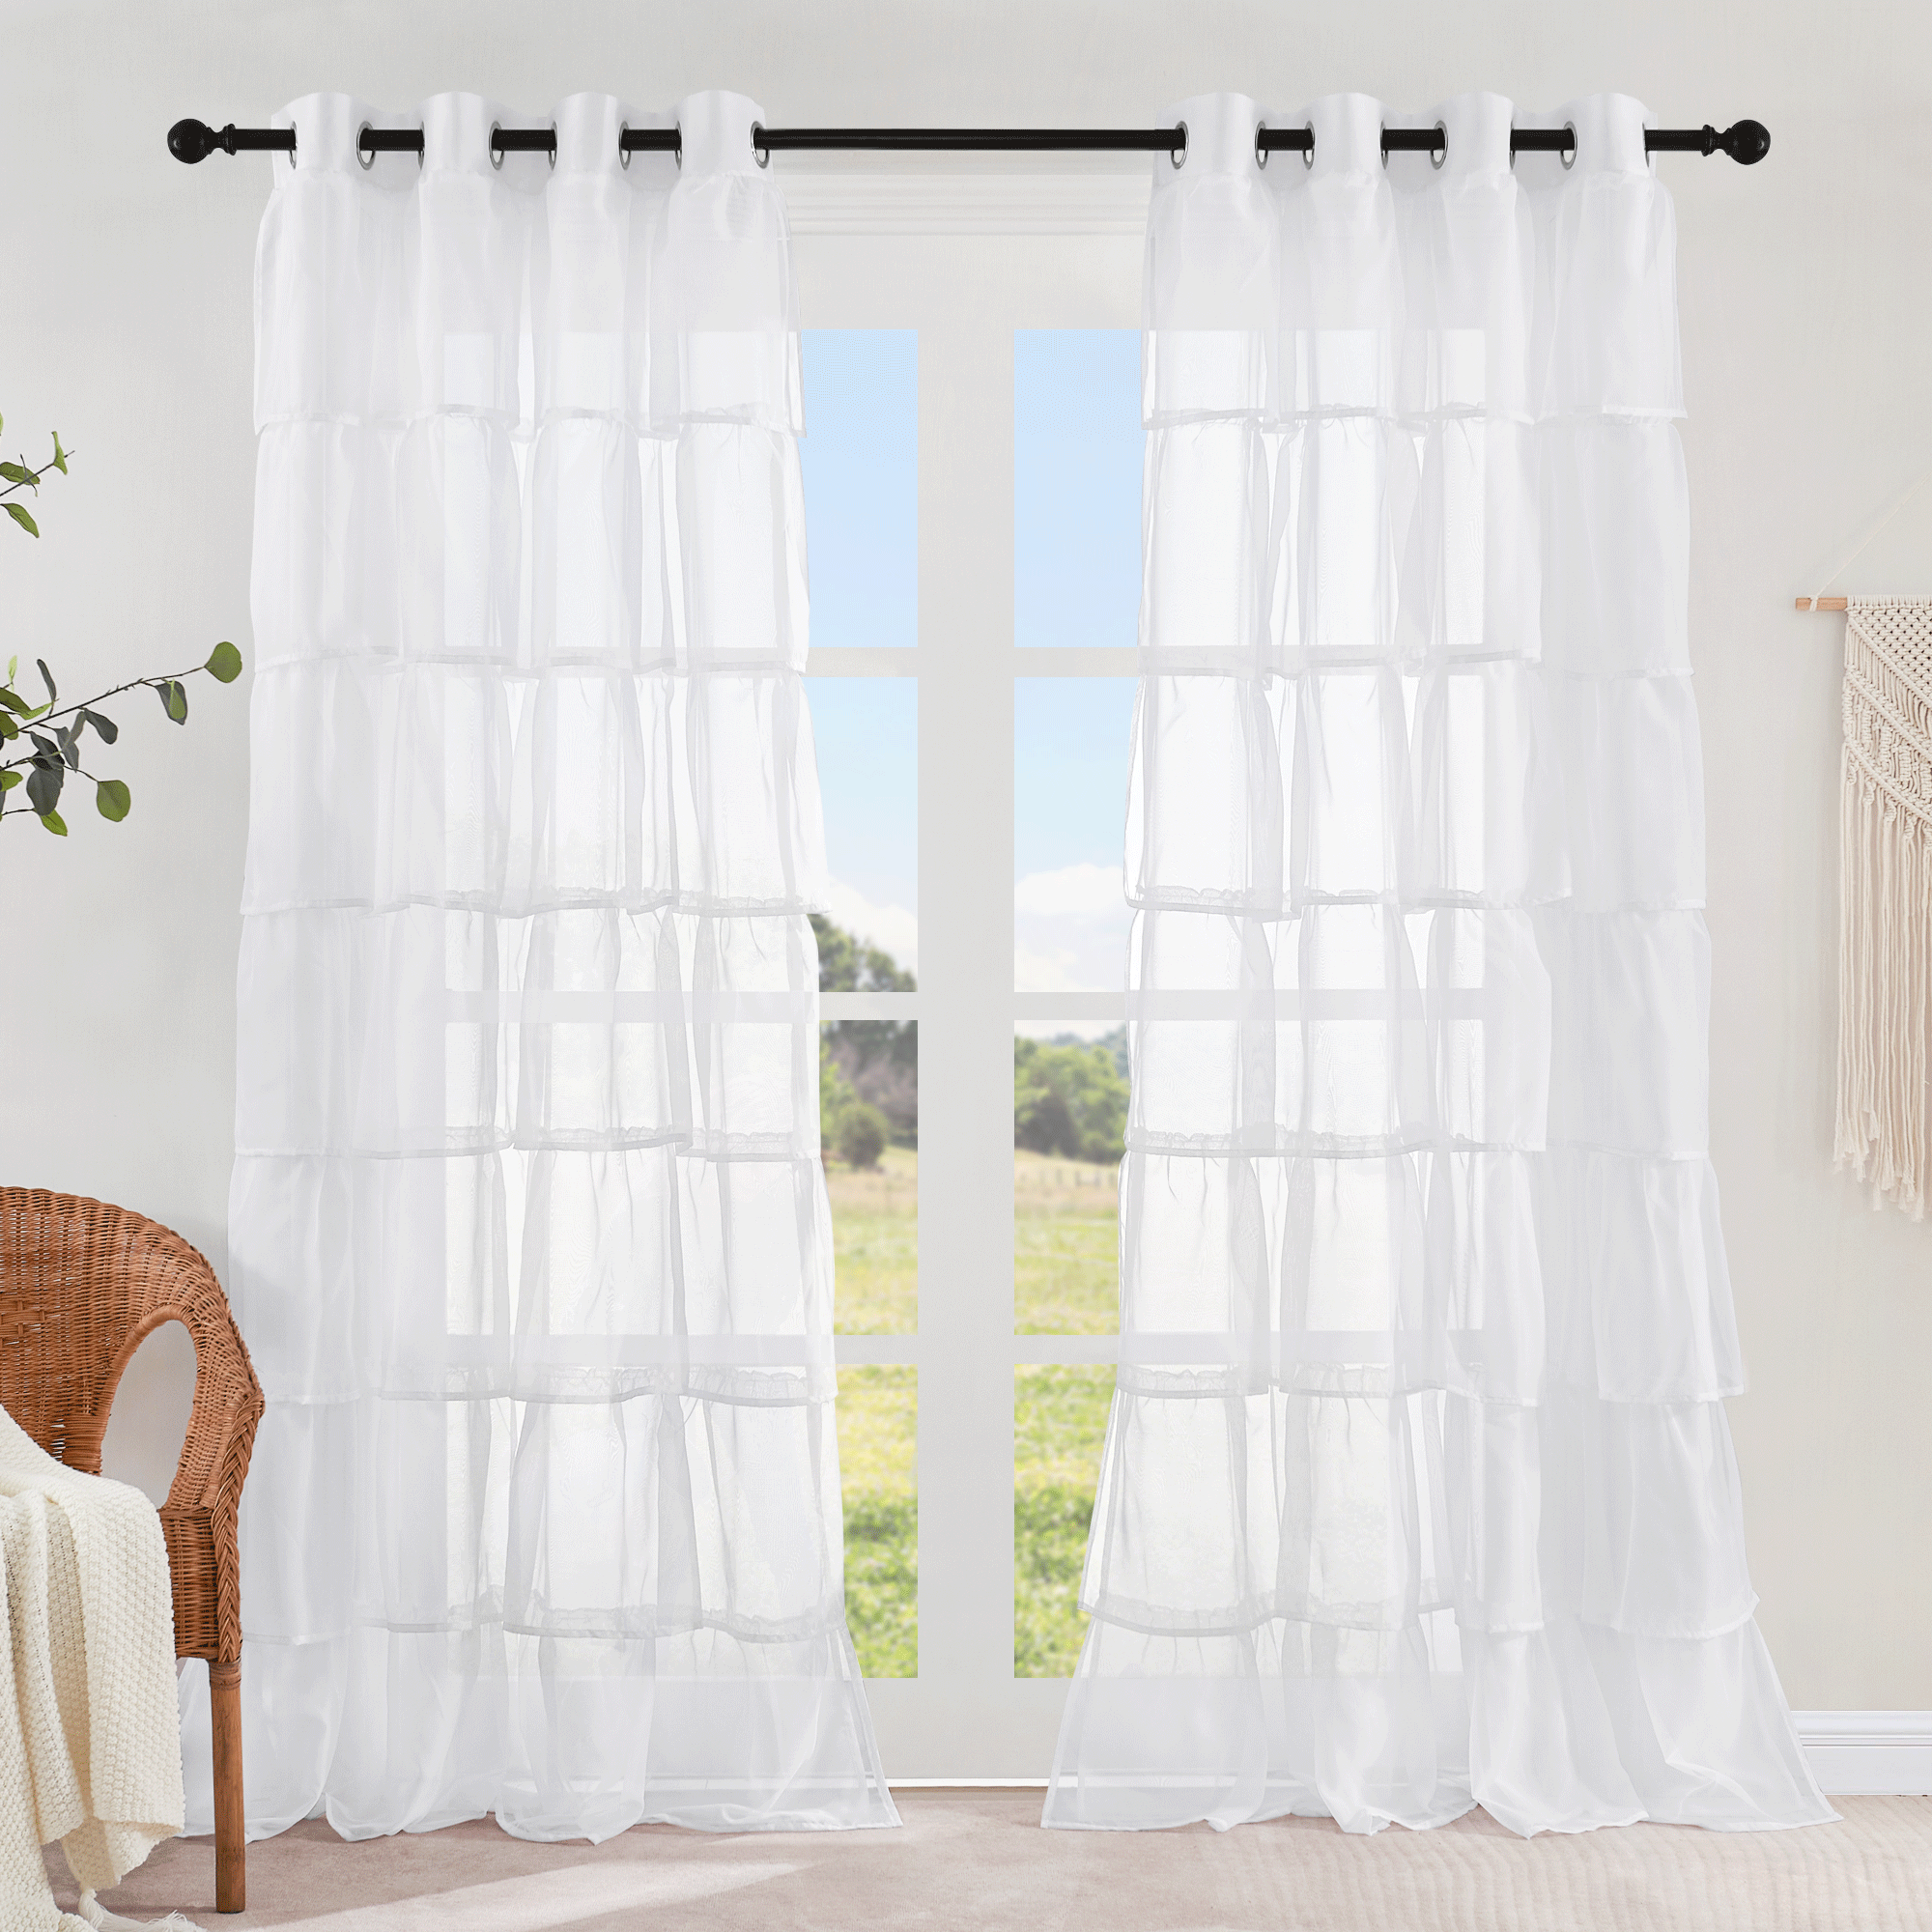 Grommet Cake Voile Sheer Curtains For Bedroom And Living Room 2 Panels KGORGE Store